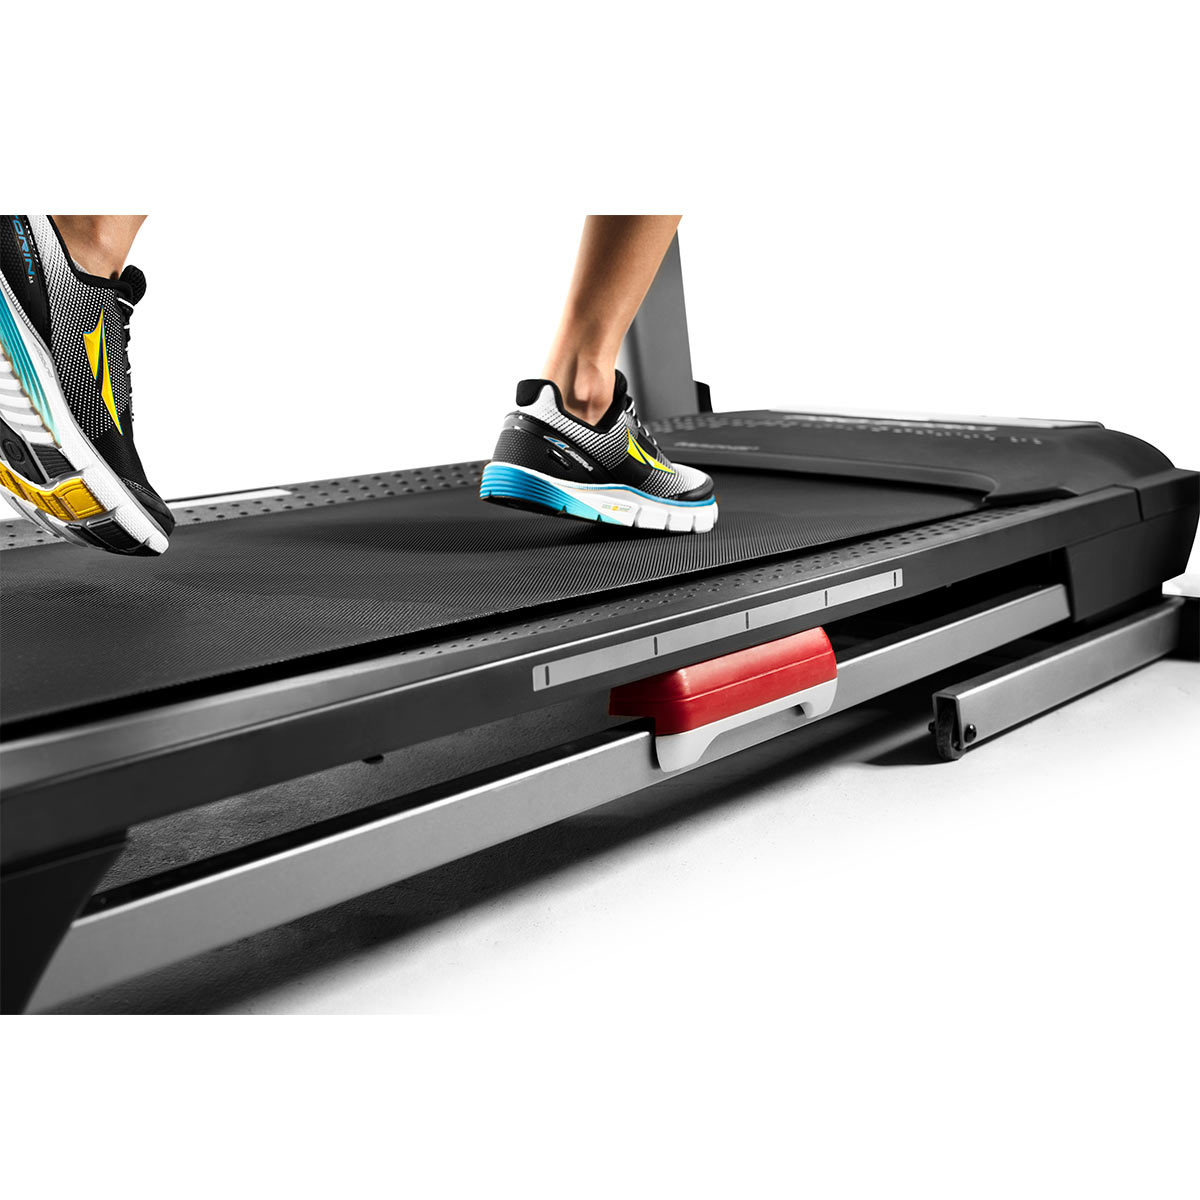 Proform Pro 1000 Treadmill - Delivery Only